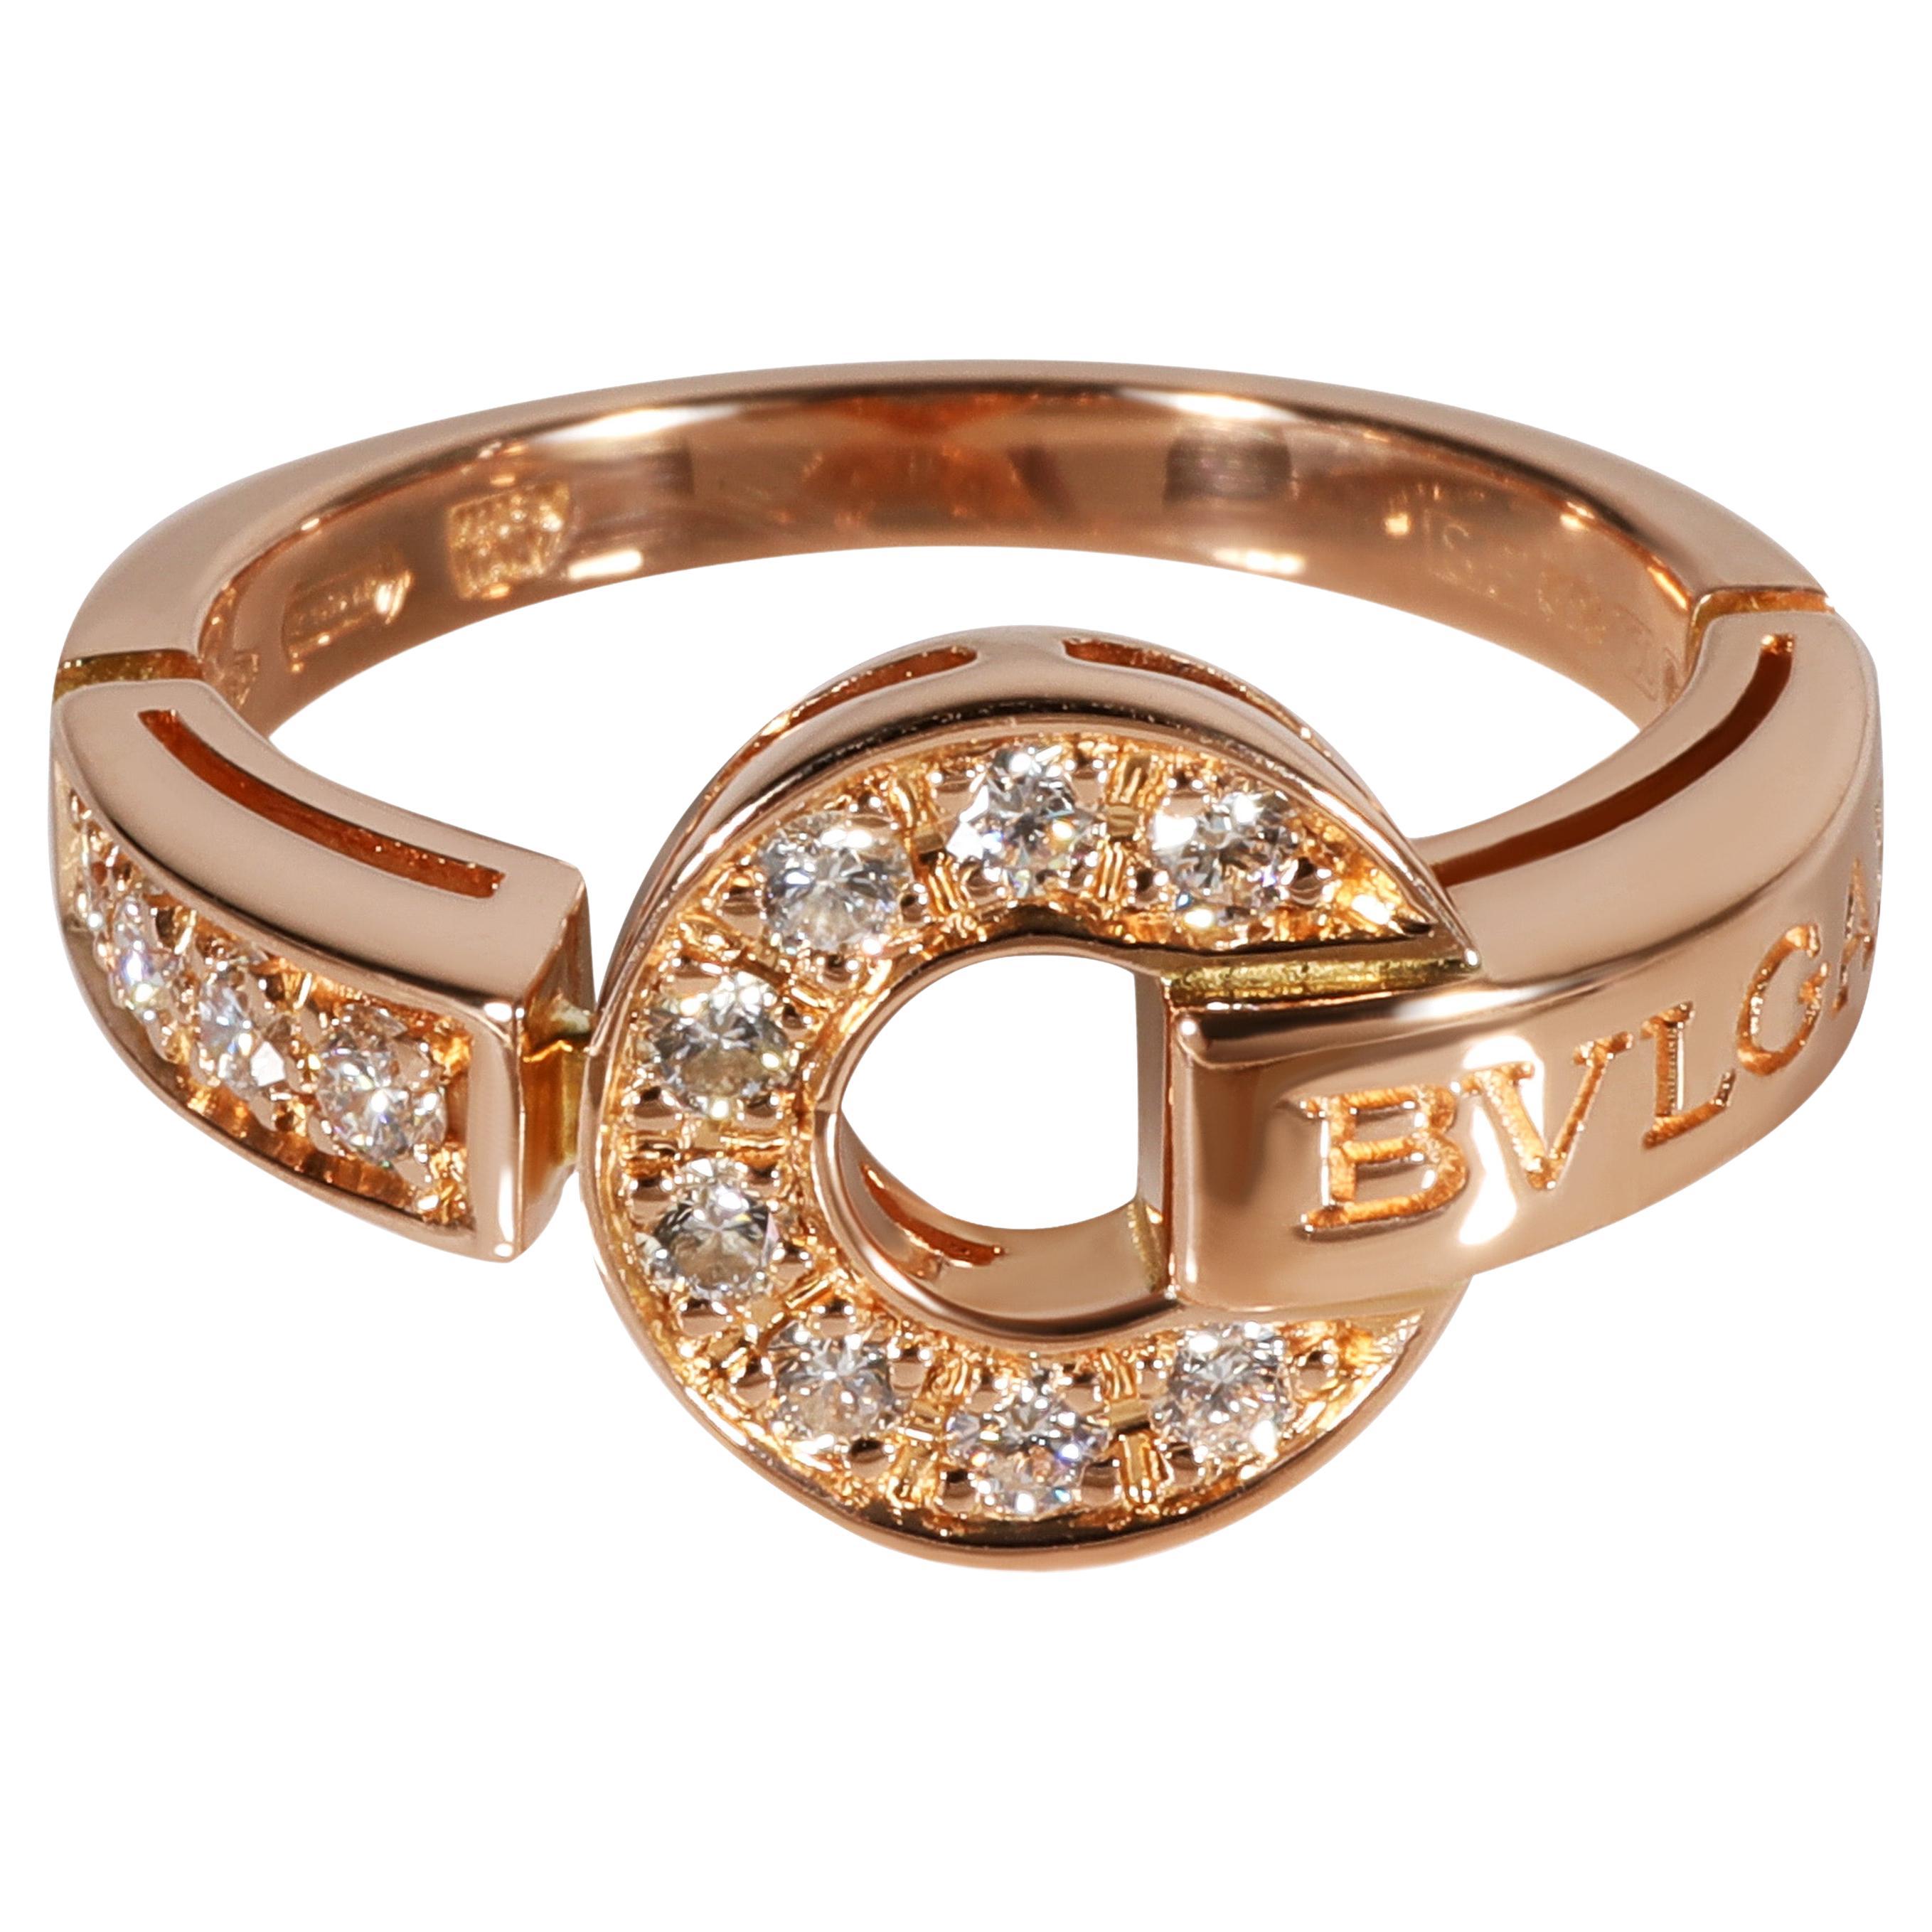 Bvlgari Jewelry - 1,381 For Sale at 1stdibs | 